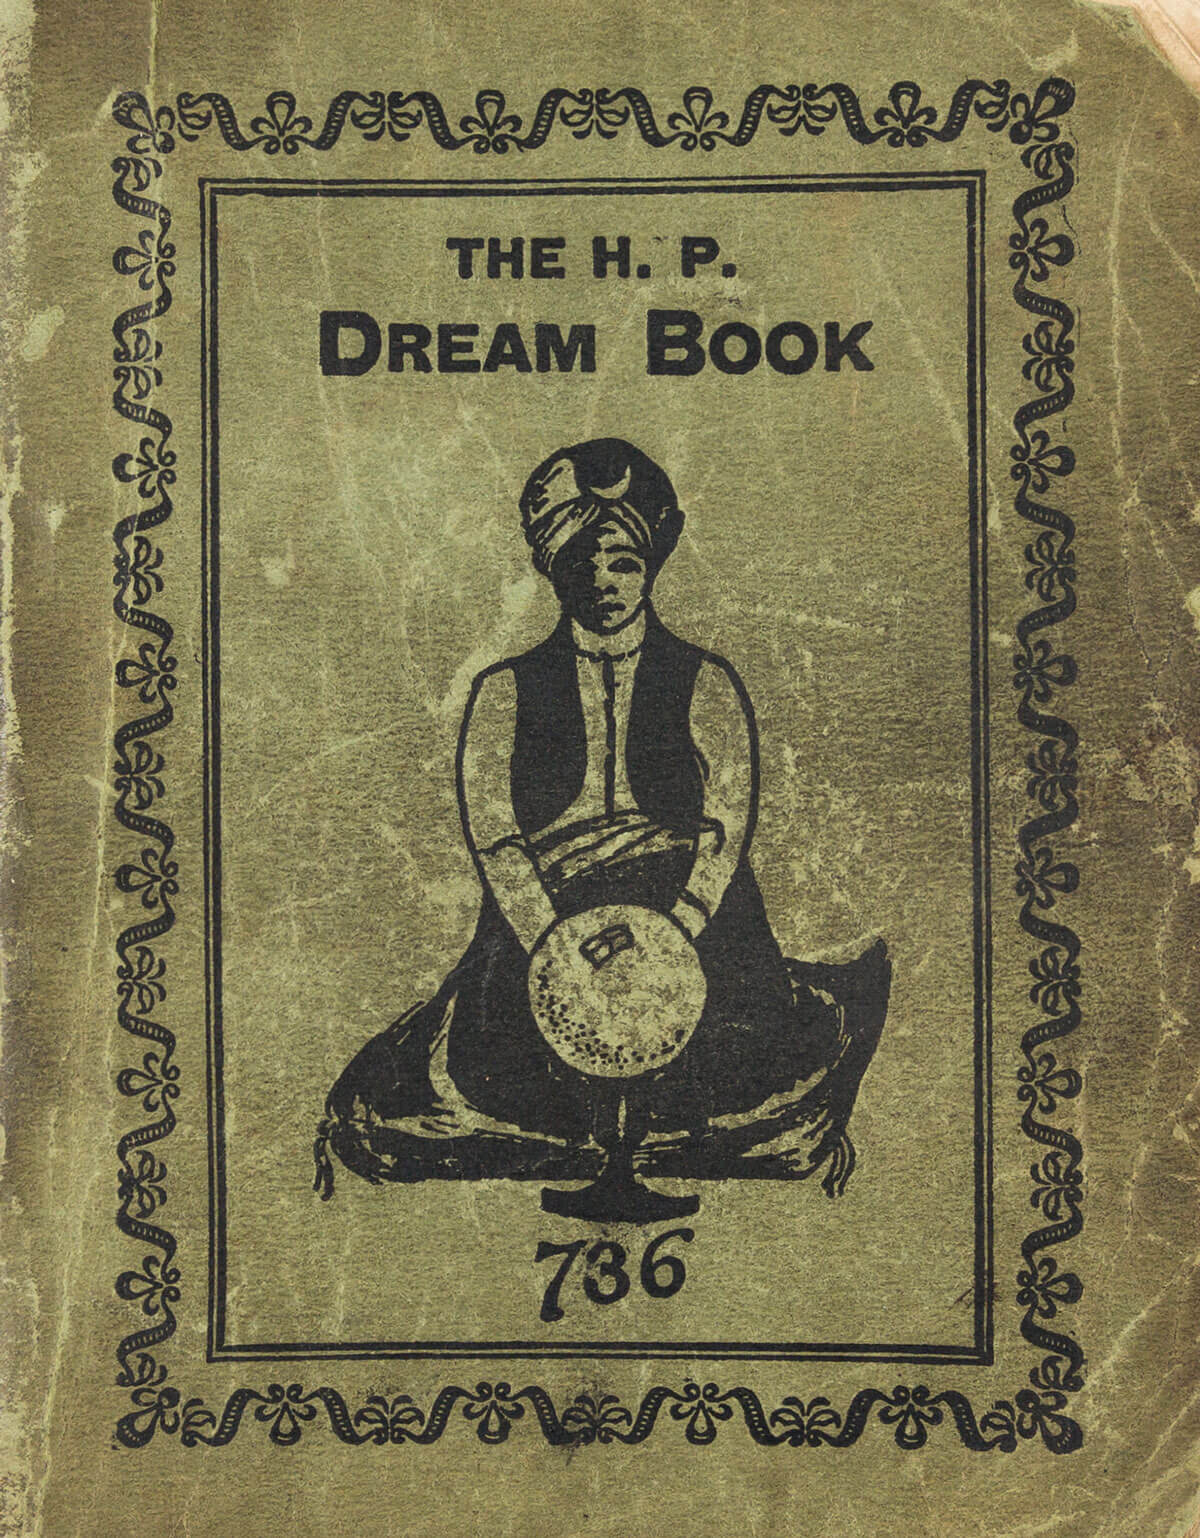 Front cover of The H. P. Dream Book, published in 1926 by G. Parris Co., depicting a fakir seated before a “looking-glass” and, beneath him, the number 736. The book’s entries for “looking-glass,” “Hindoo,” “dream book,” and “Prof. Konje,” are all similarly associated with the number 736.